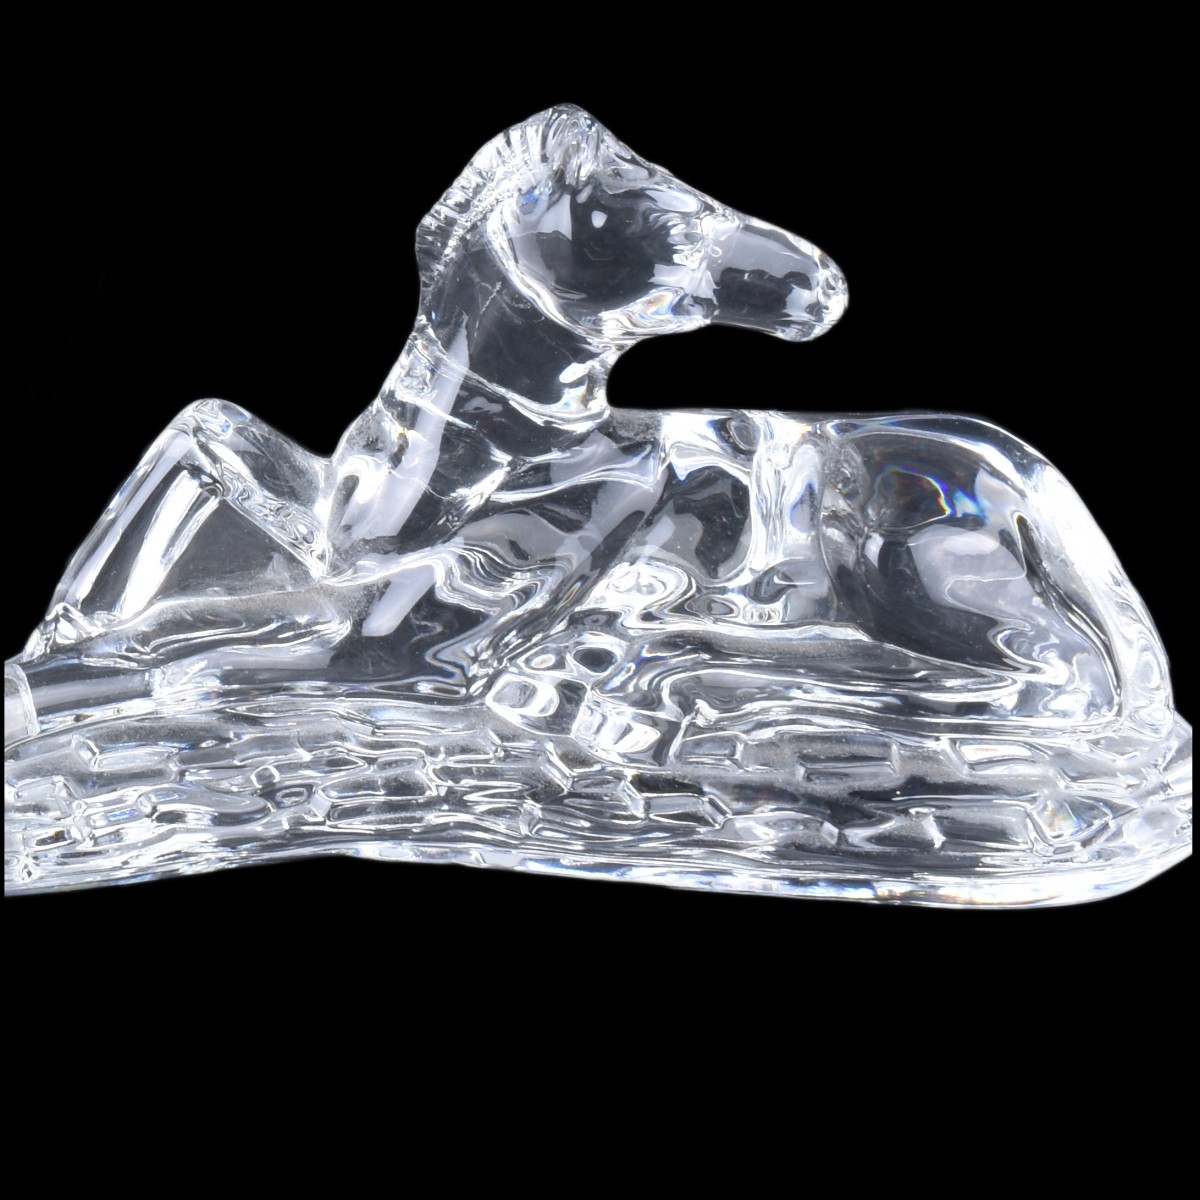 Two (2) Waterford Crystal Horse Figurines